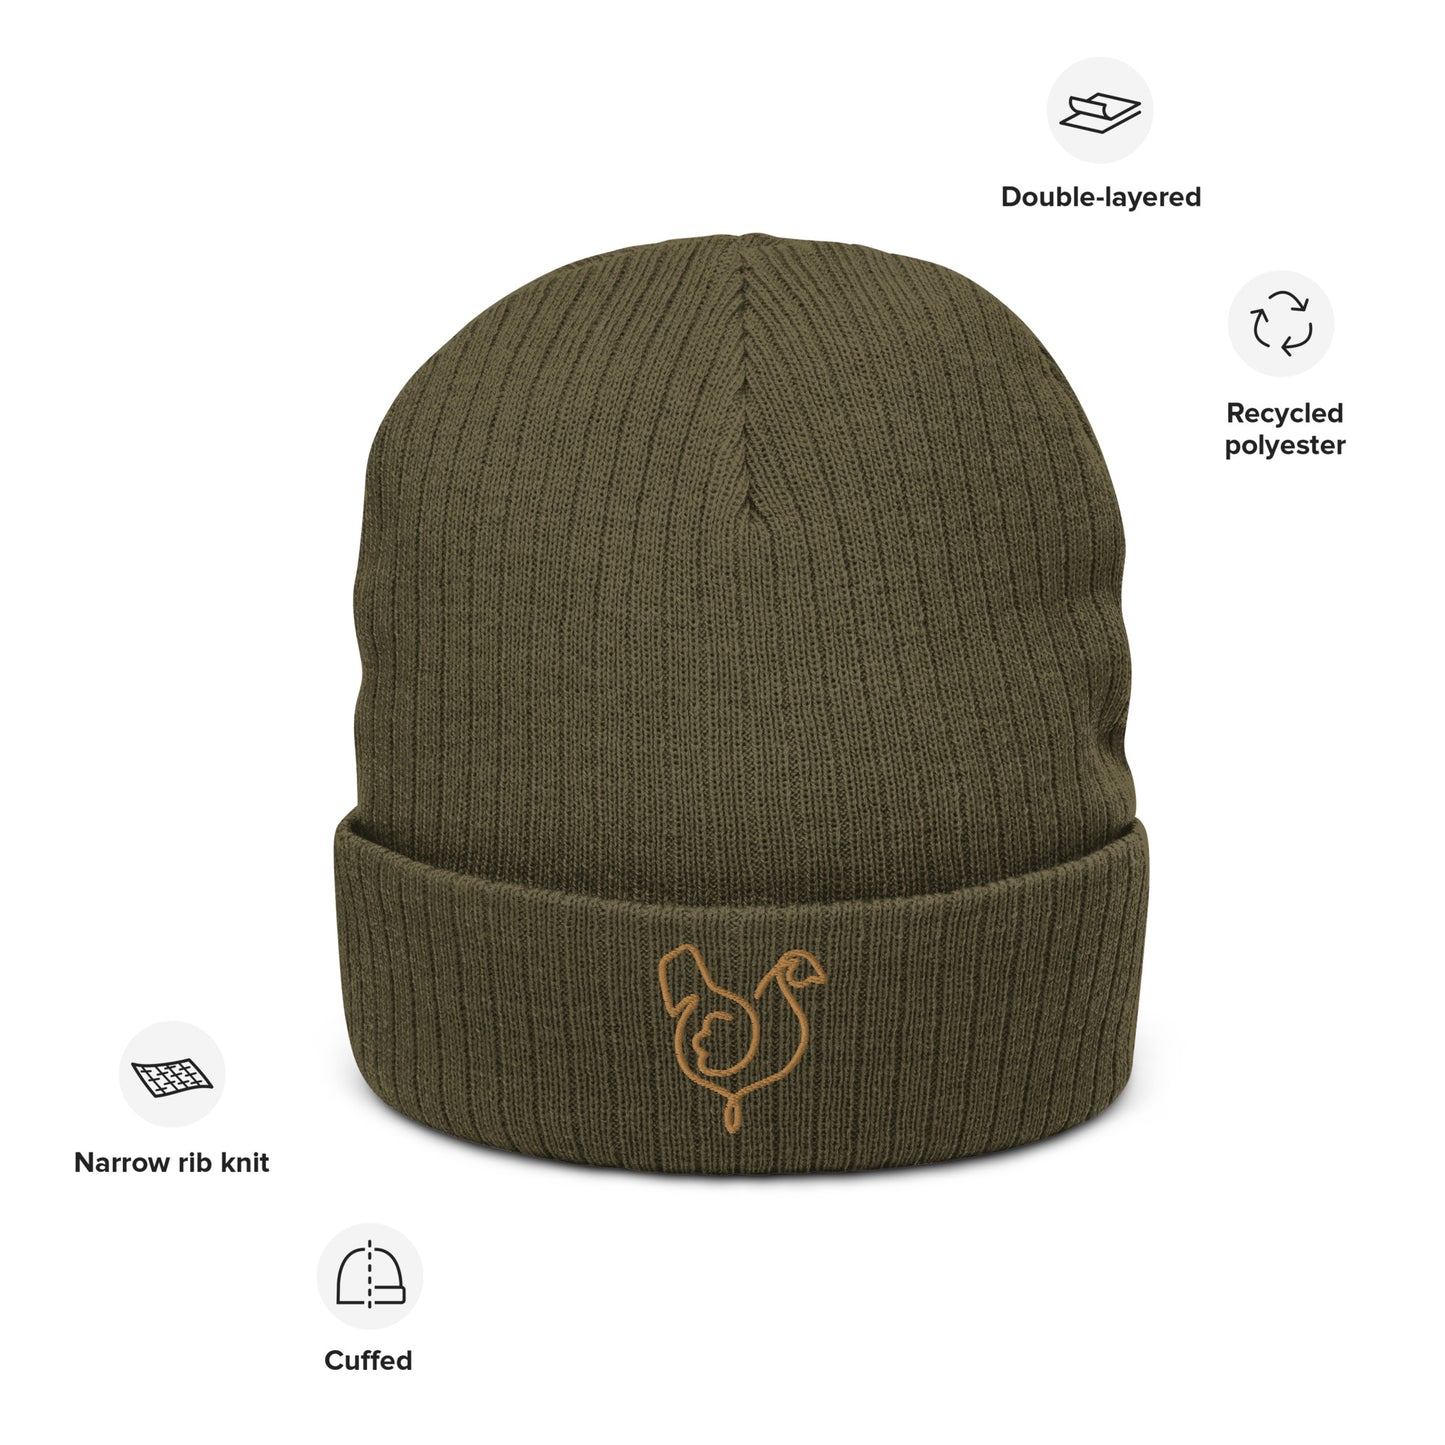 Vegan "Chicken" Embroidered Ribbed knit beanie